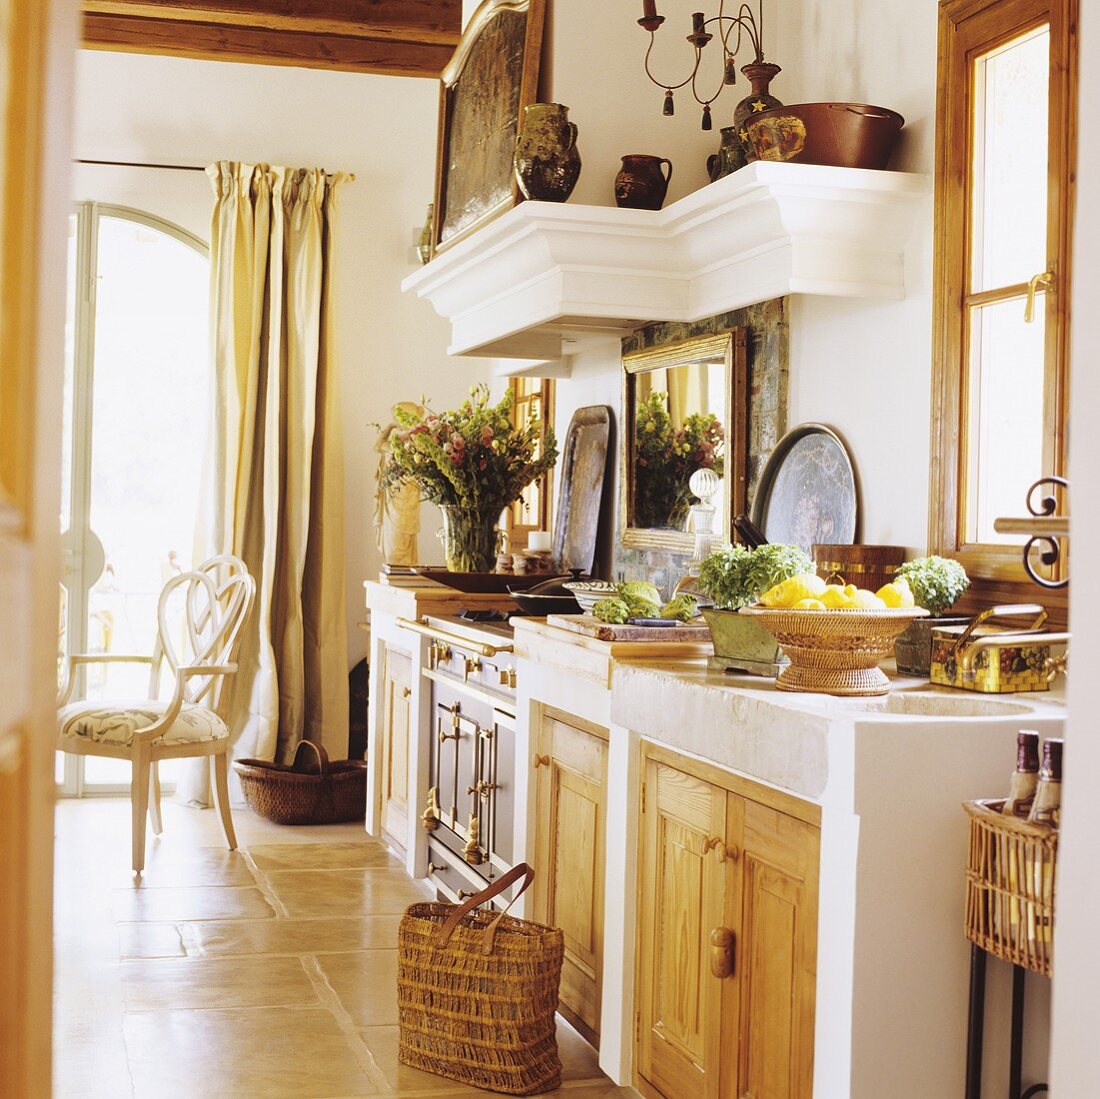 A Mediterranean house with a stone kitchen counter